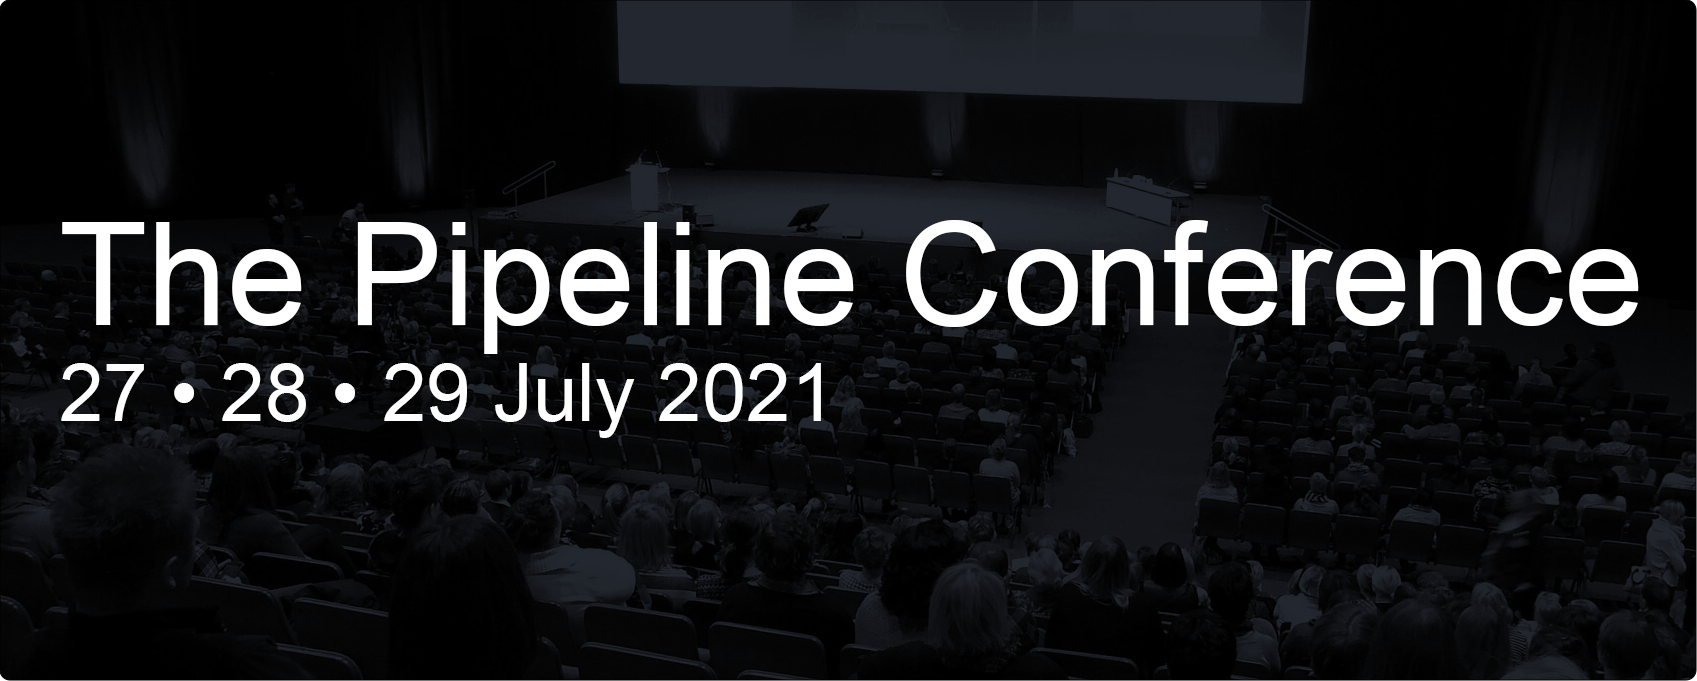 The Pipeline Conference to promote, elevate and evolve VFX/CG pipelines